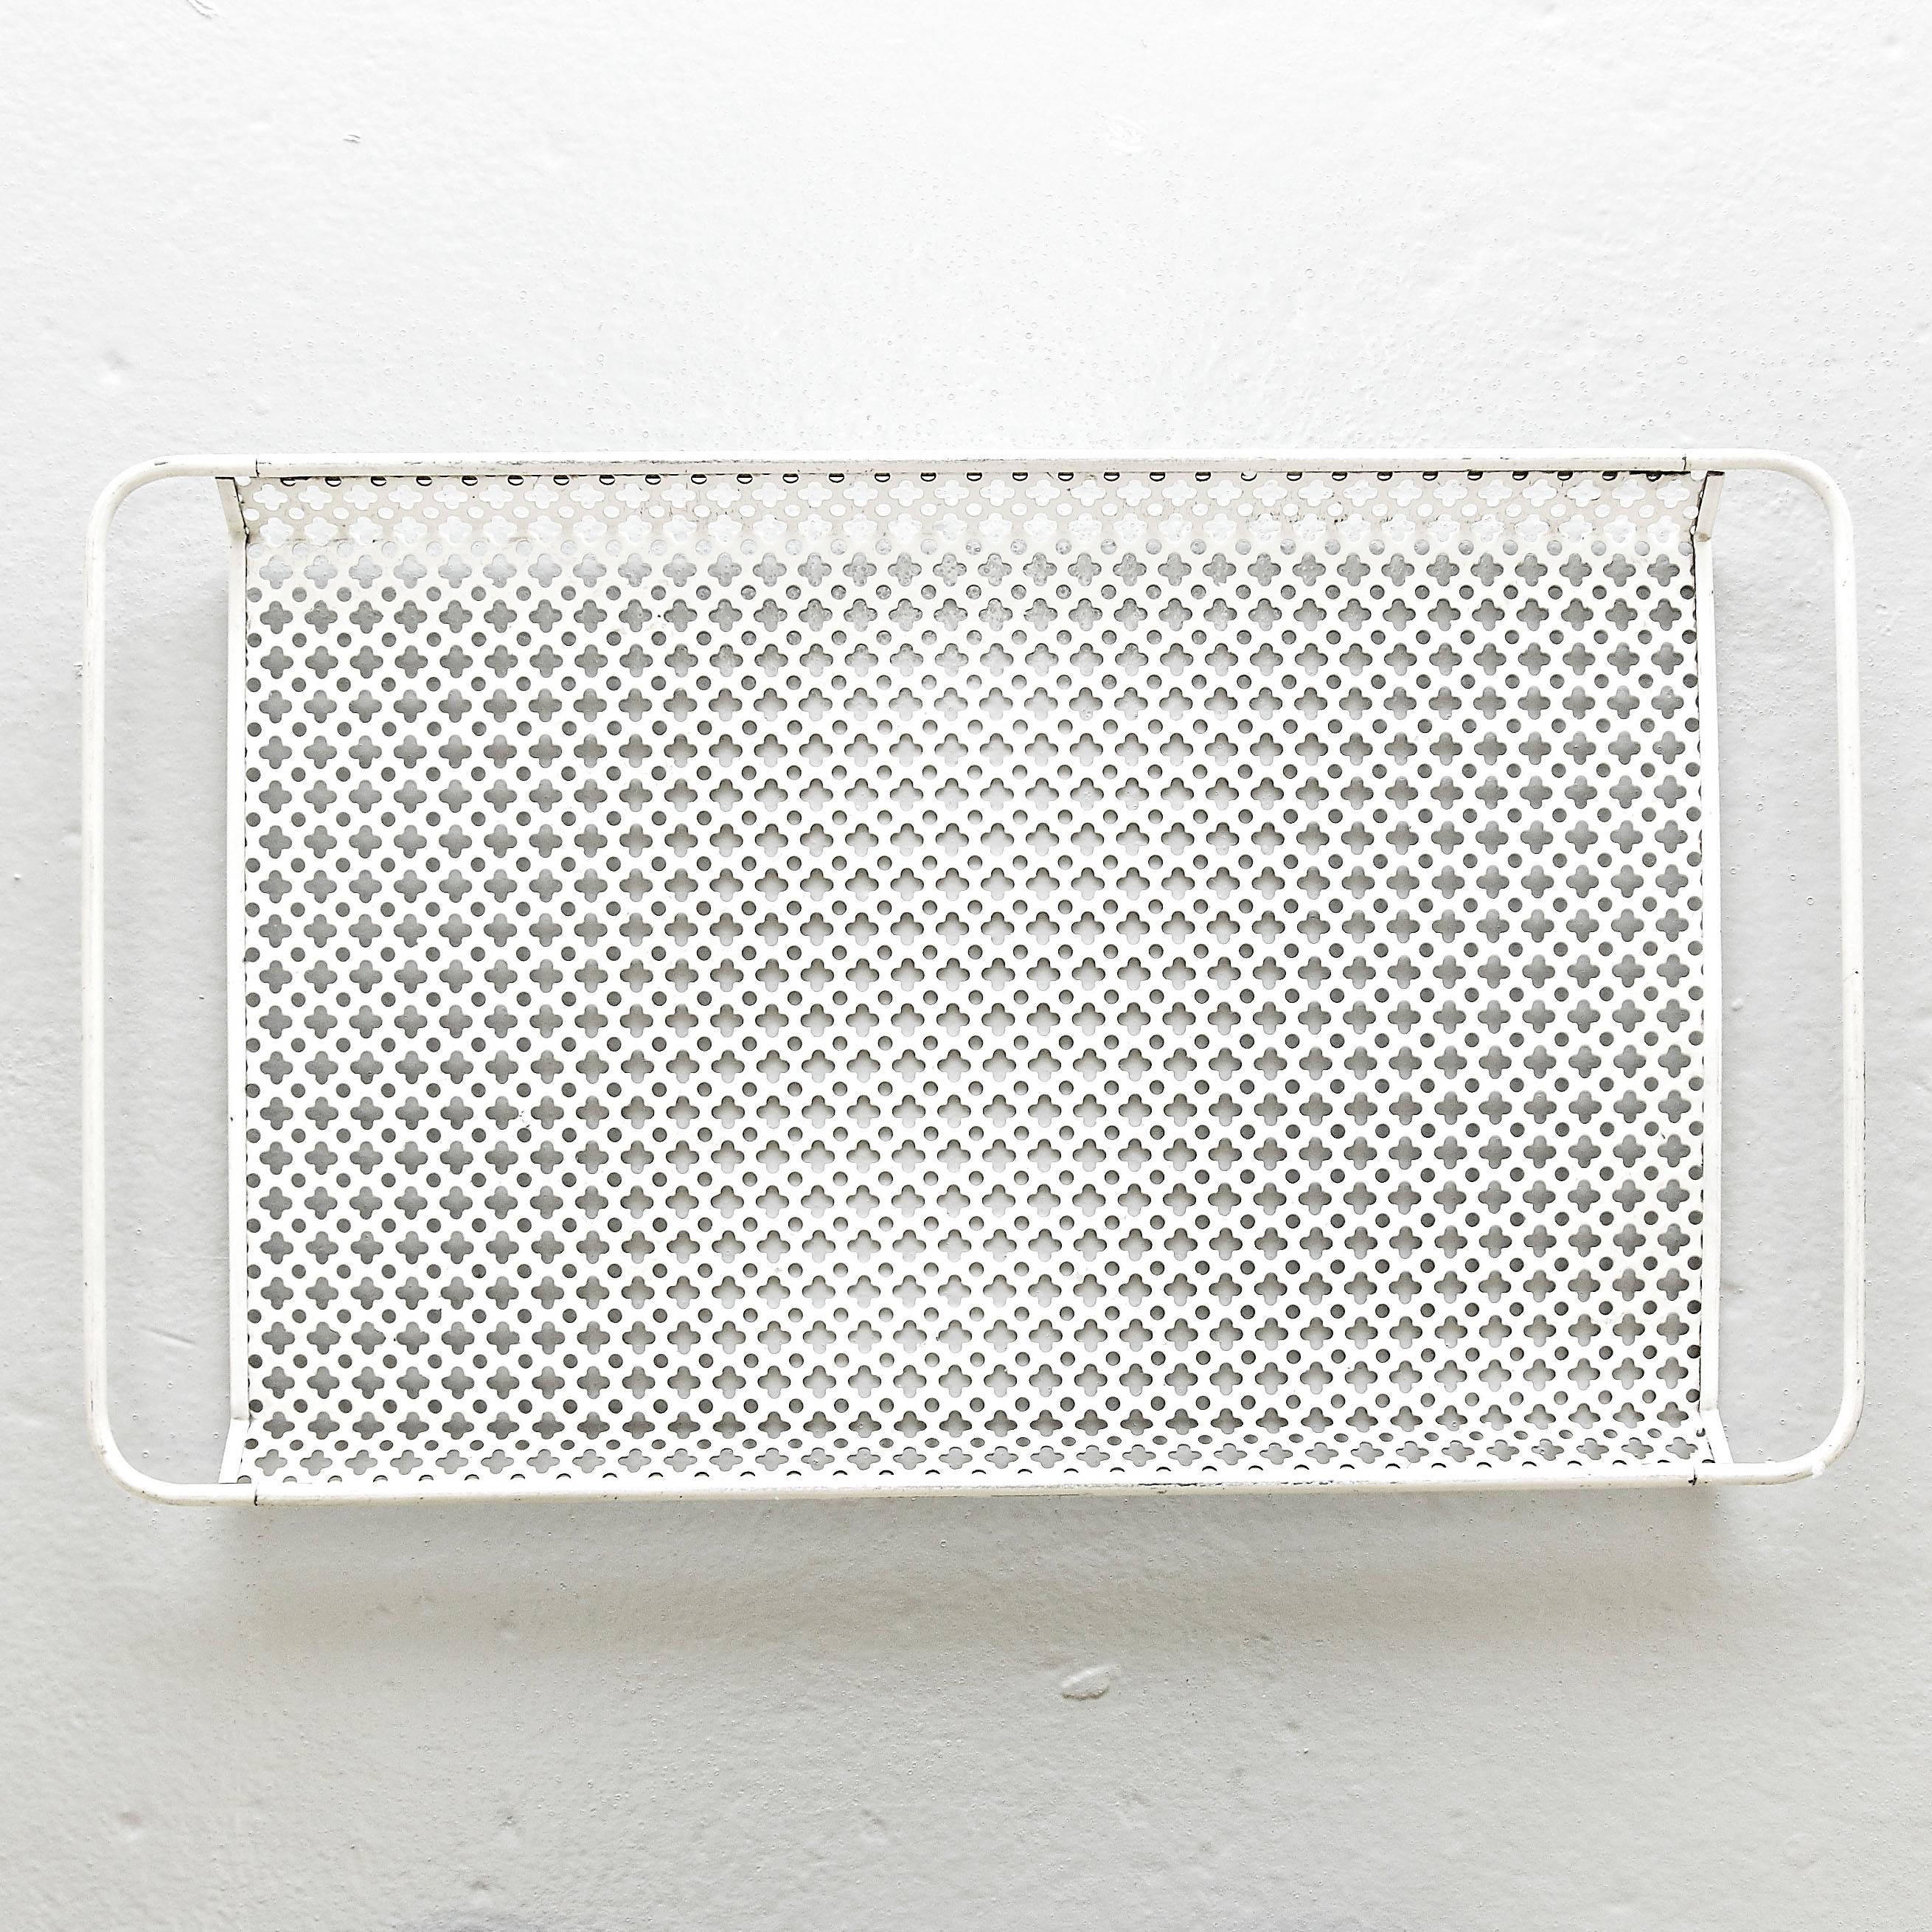 Enameled metal Tray designed by Mathieu Matégot.
Manufactured by Ateliers Matégot (France), circa 1950.
Lacquered perforated metal with original paint.

In good original condition, with minor wear consistent with age and use, preserving a